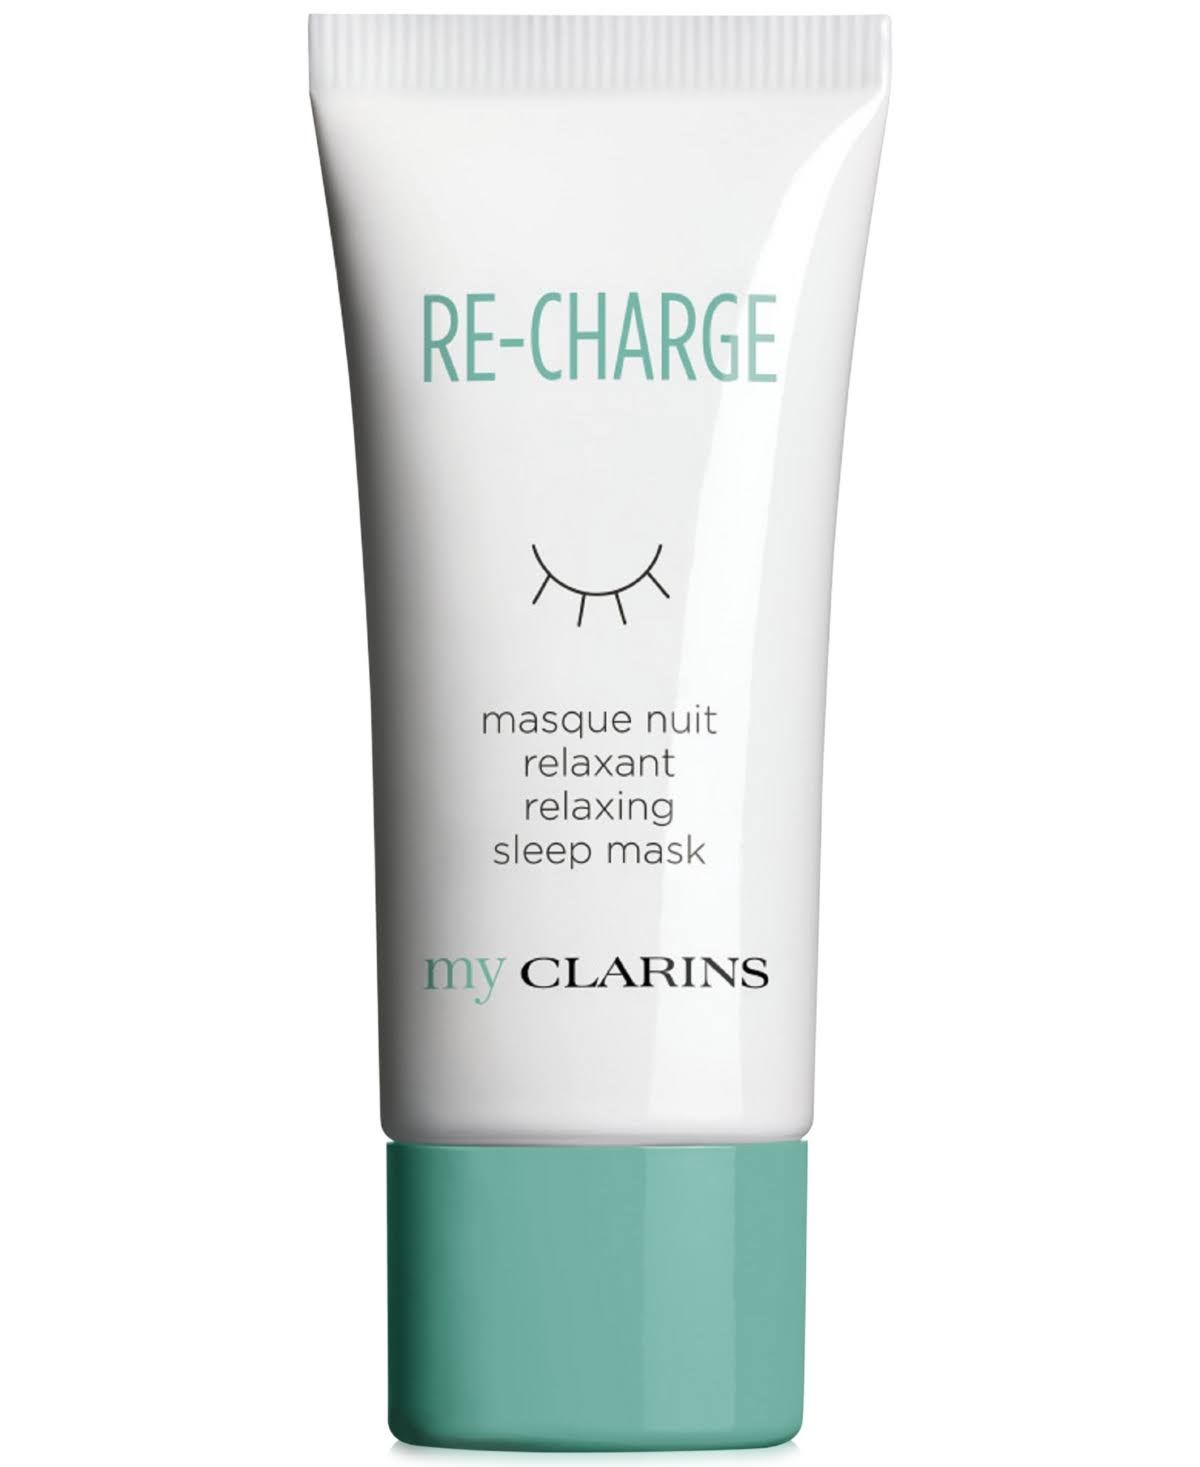 Clarins 272245 1 oz My Re-Charge Relaxing Sleep Mask